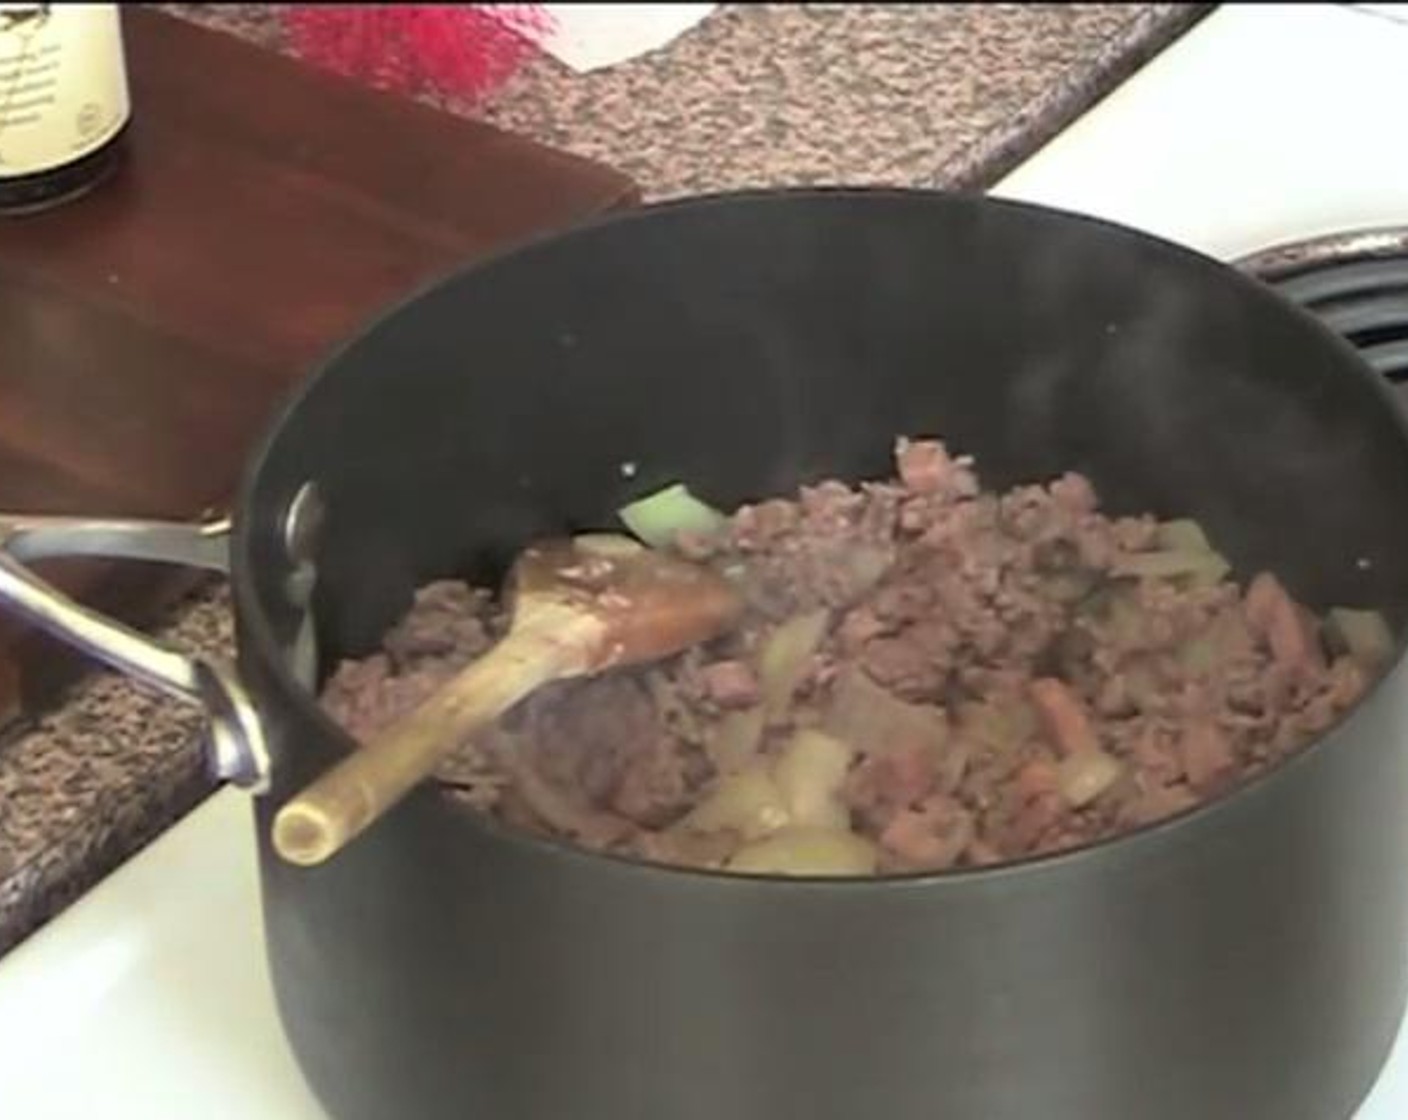 step 2 After a while, add the Ground Beef (1.1 lb) to the pot and cook over high heat.